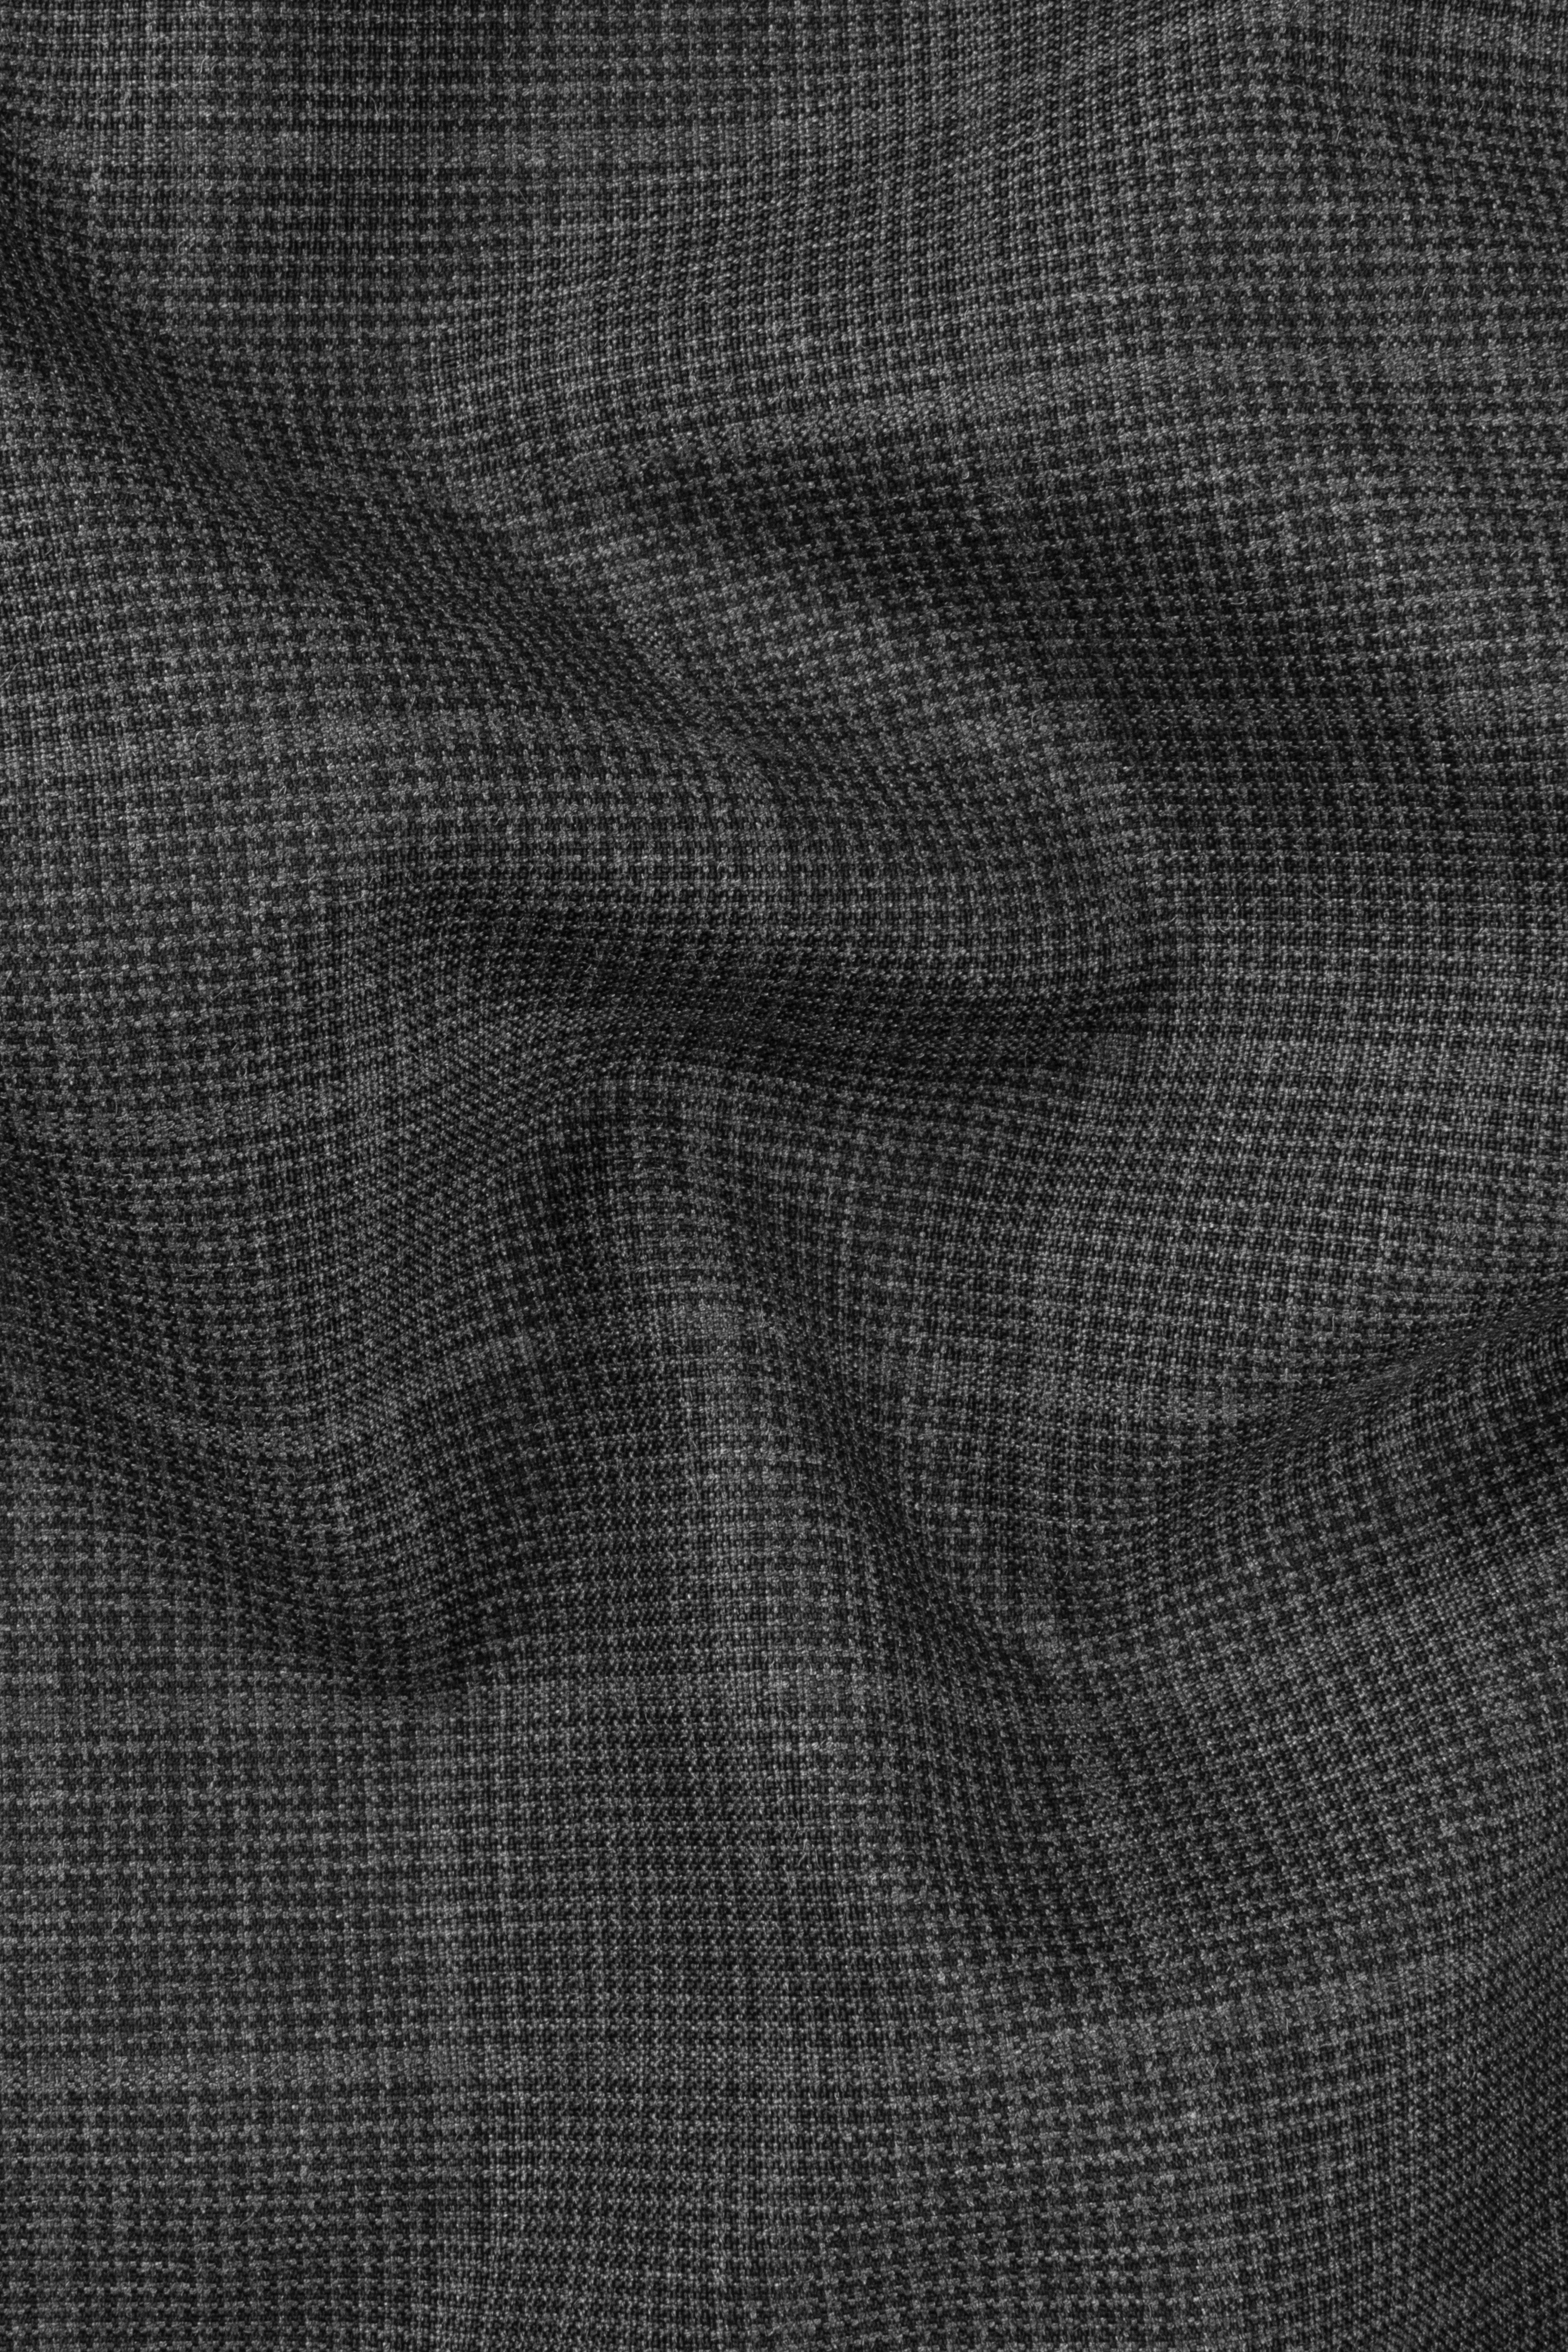 Iridium Gray Plaid Wool Blend Double Breasted Suit